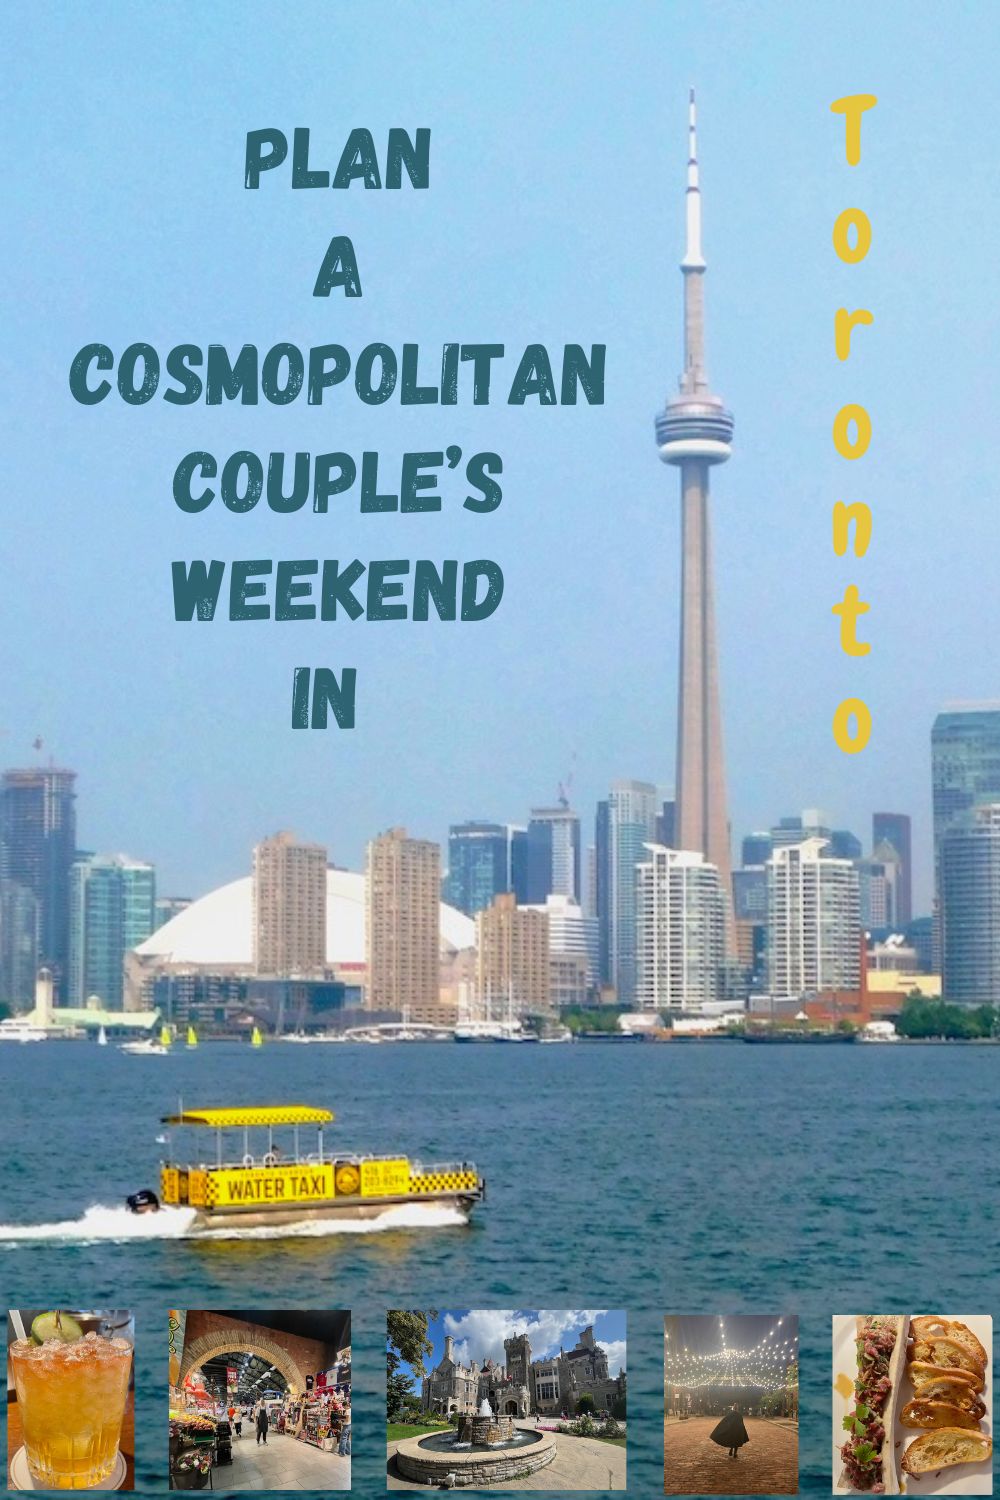 here are some of the best things to see, eat & do on a cosmopolitan couples weekend getaway in toronto. plus 3 smart hotel ideas.